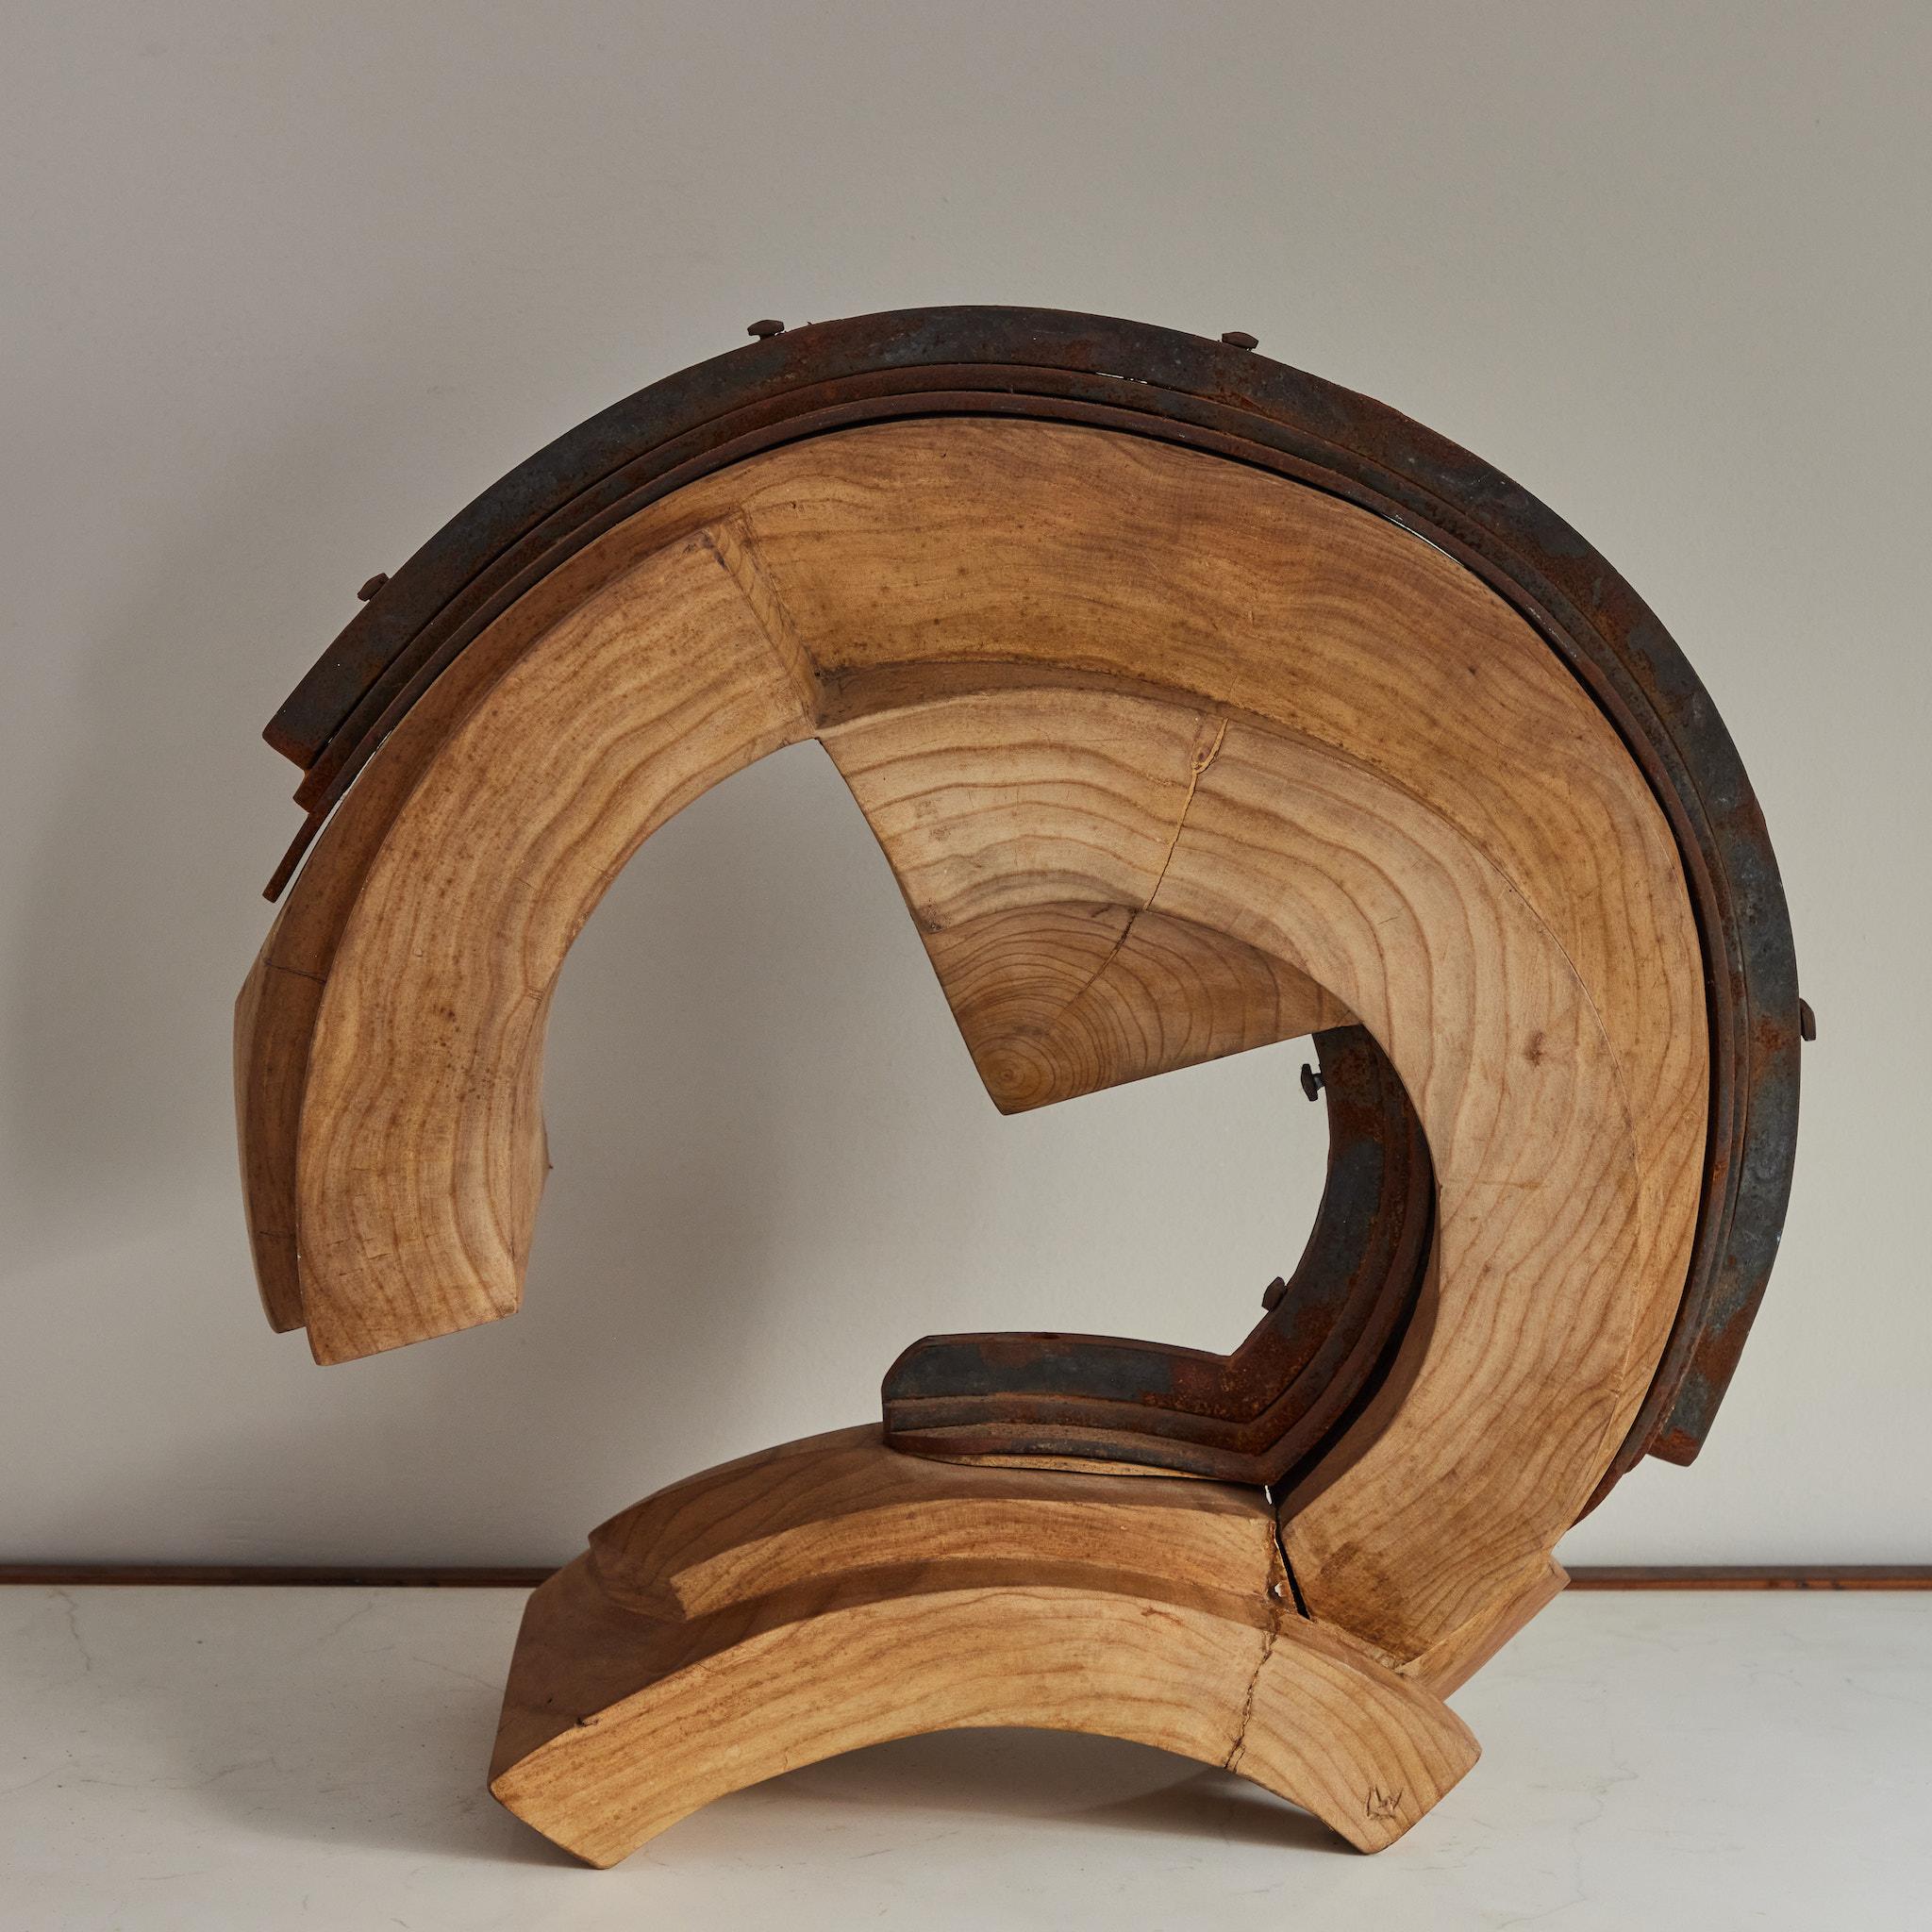 Carved raw wood sculpture from mid-century France. Celebrating the natural beauty of wood, this sculptural object has an organic yet industrial feel.  Blending softness and strength, the piece adds an earthy, modern accent to any decorative space. 
